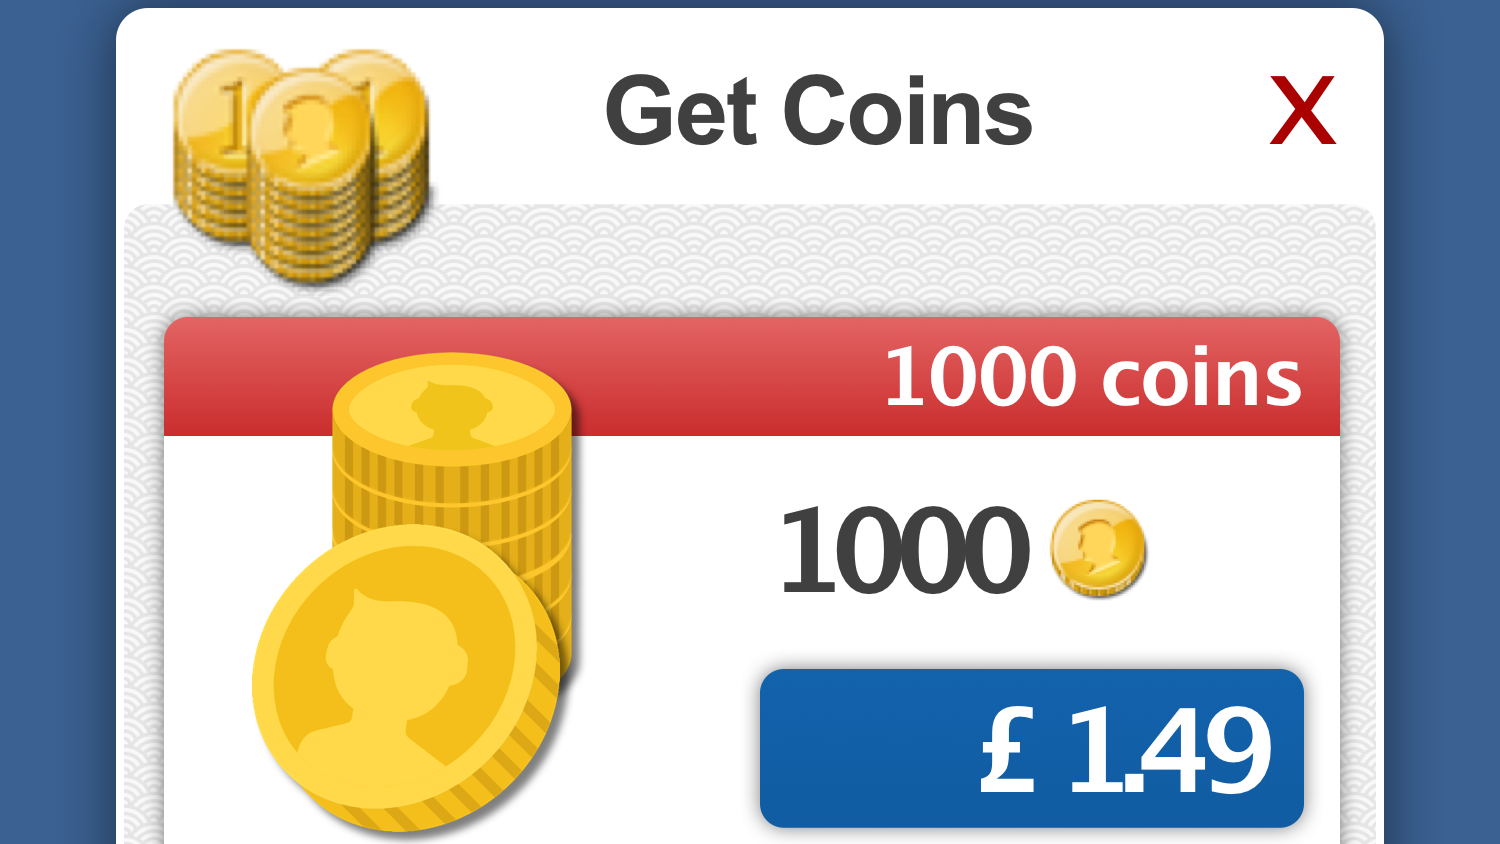 Games sell virtual currencies to spend in-app